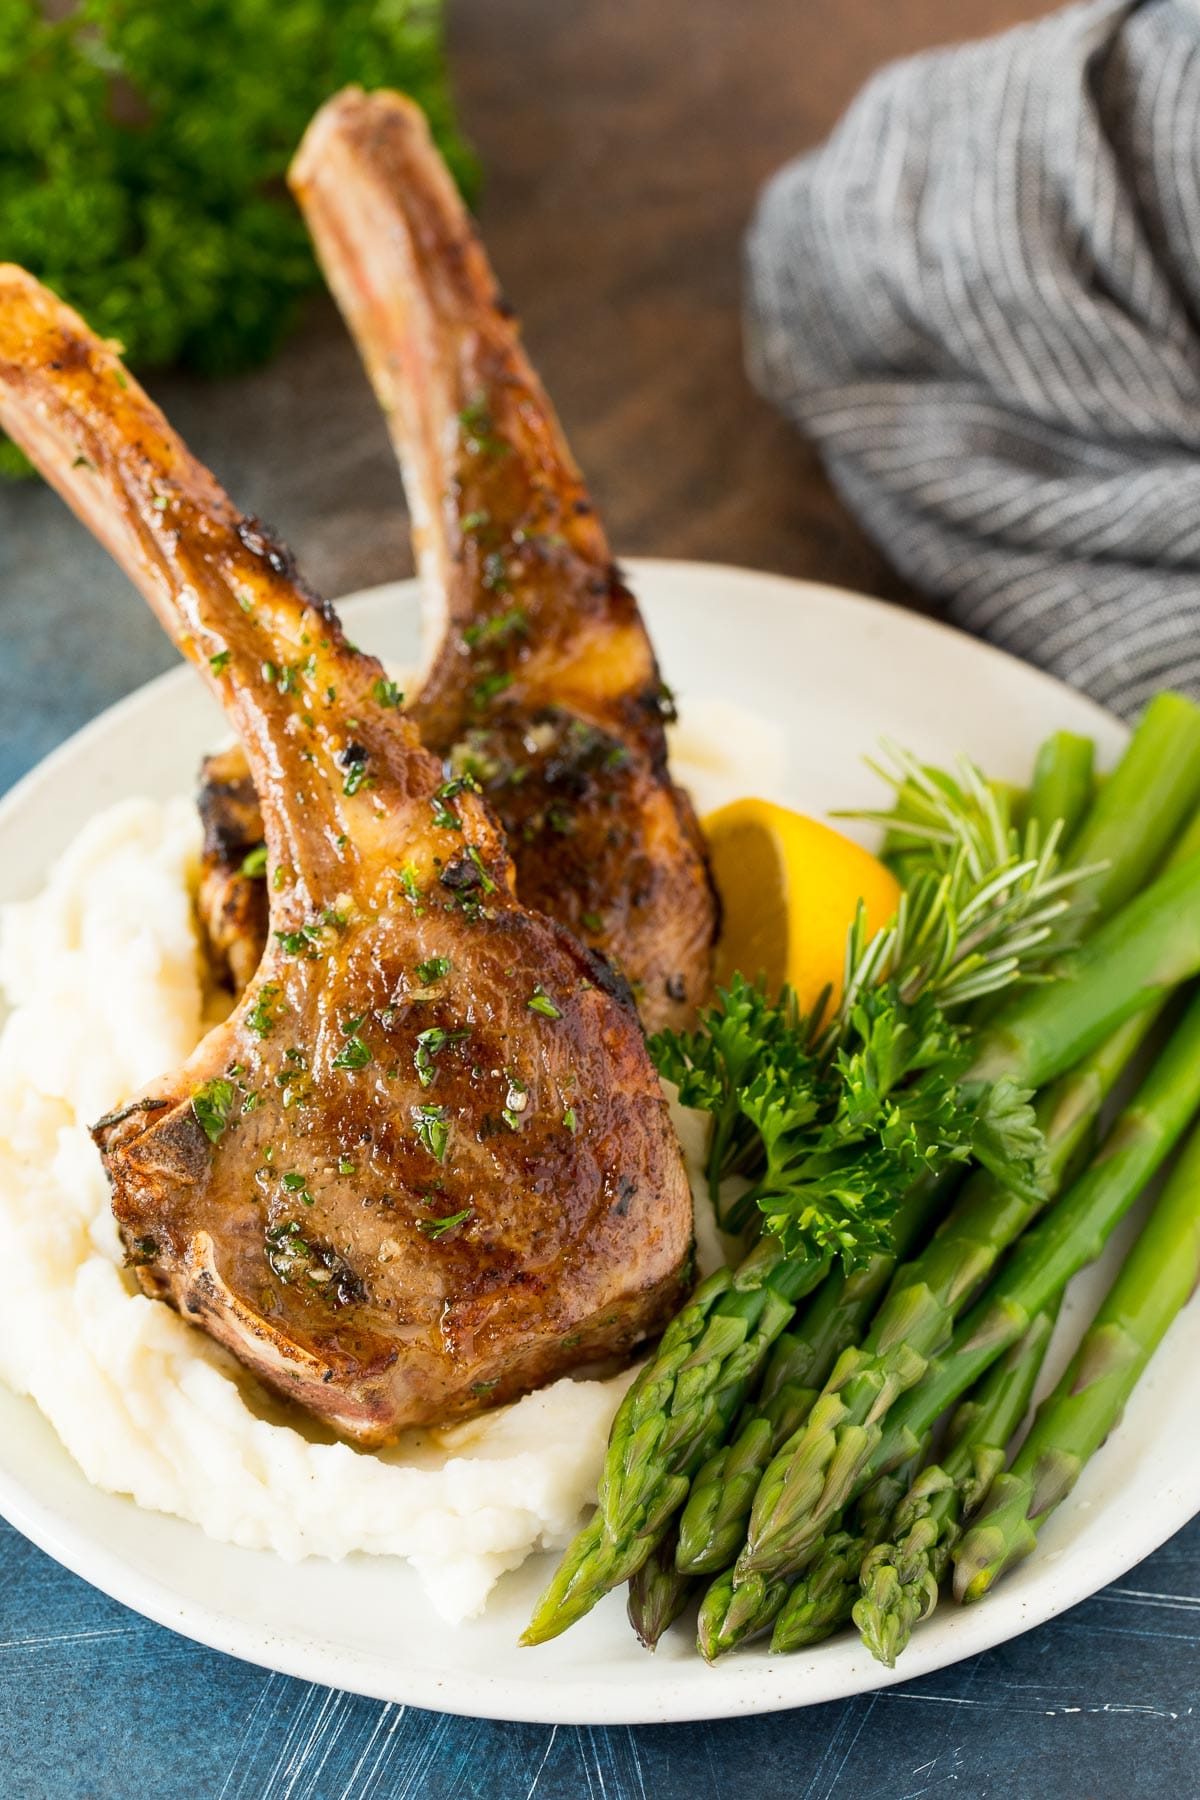 Grilled lamb chops served with mashed potatoes and asparagus.